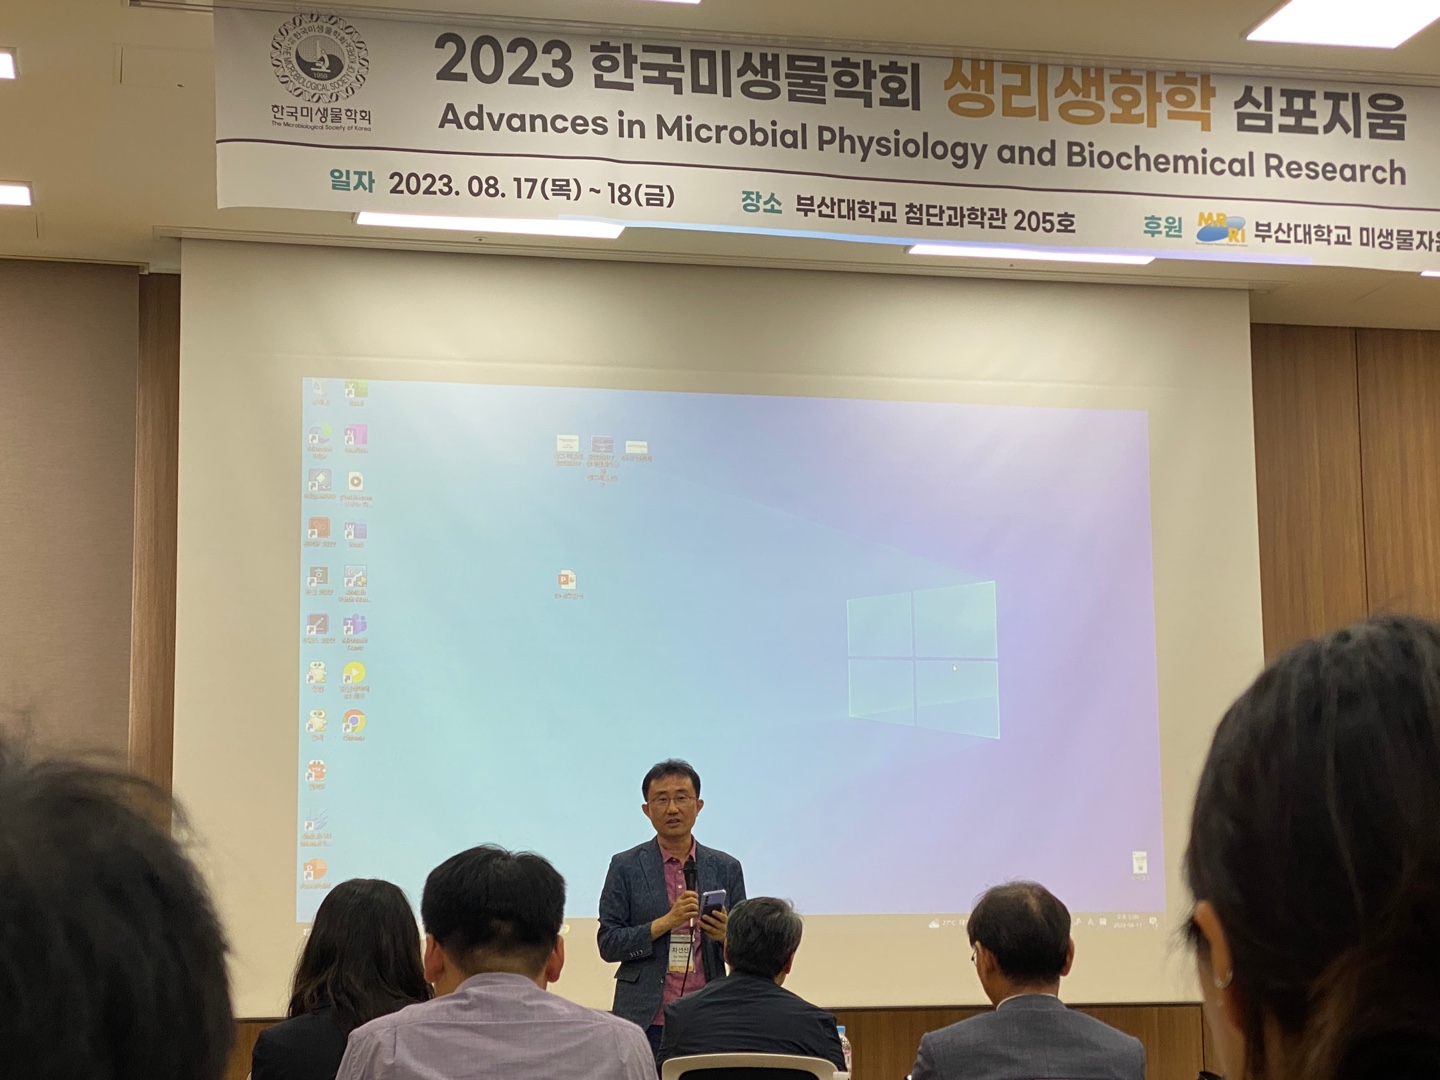 23.08.17-18 2023 Advances in Microbial Physiology and Biochemical Research (MSK 생리생화학 심포지움)